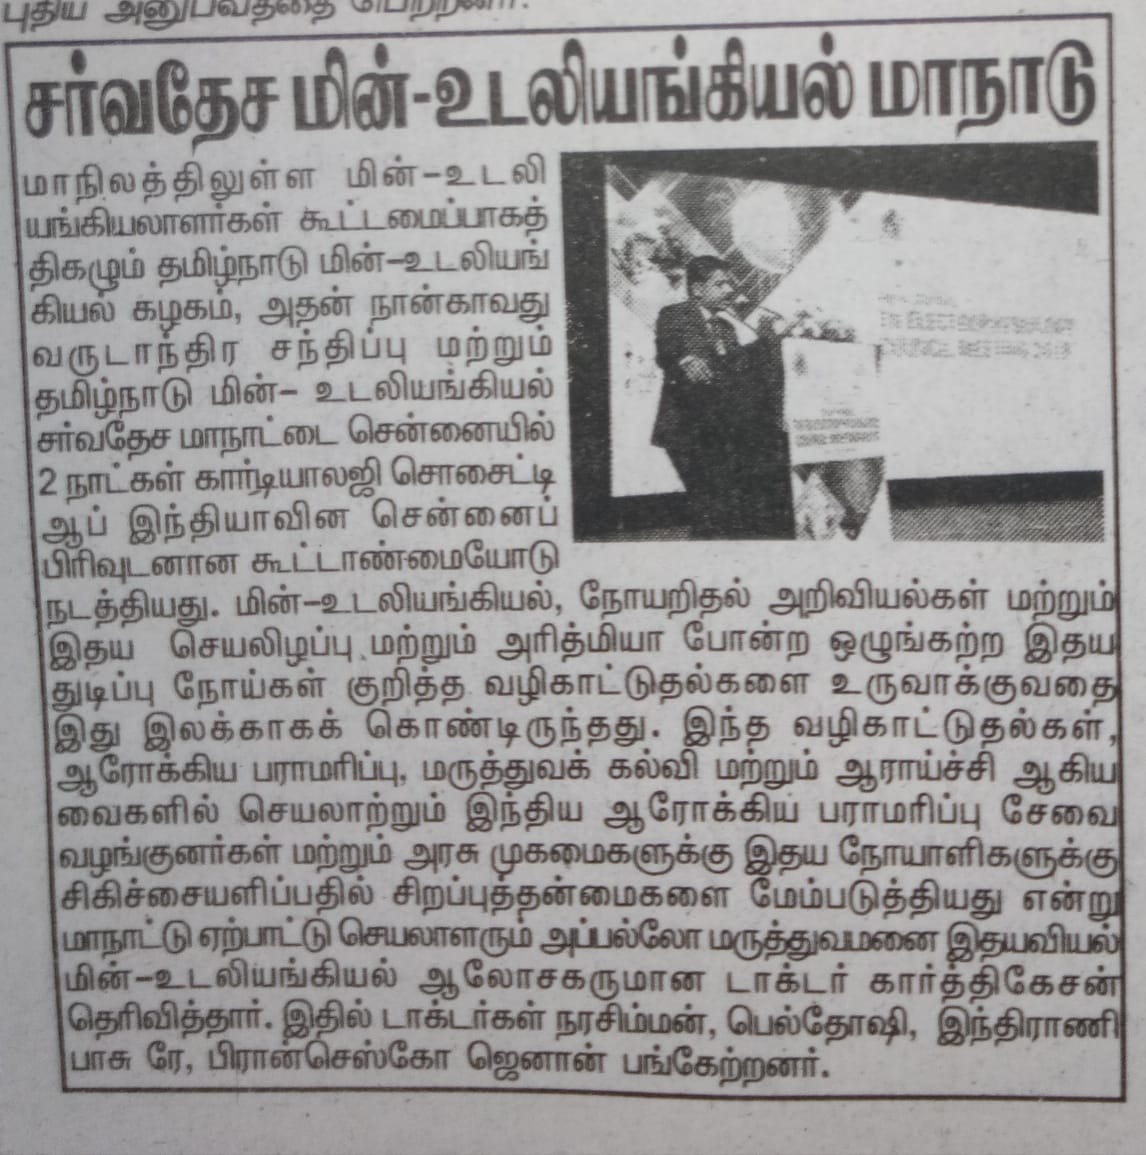 A Tamil news clipping about a conference related to cardio health.